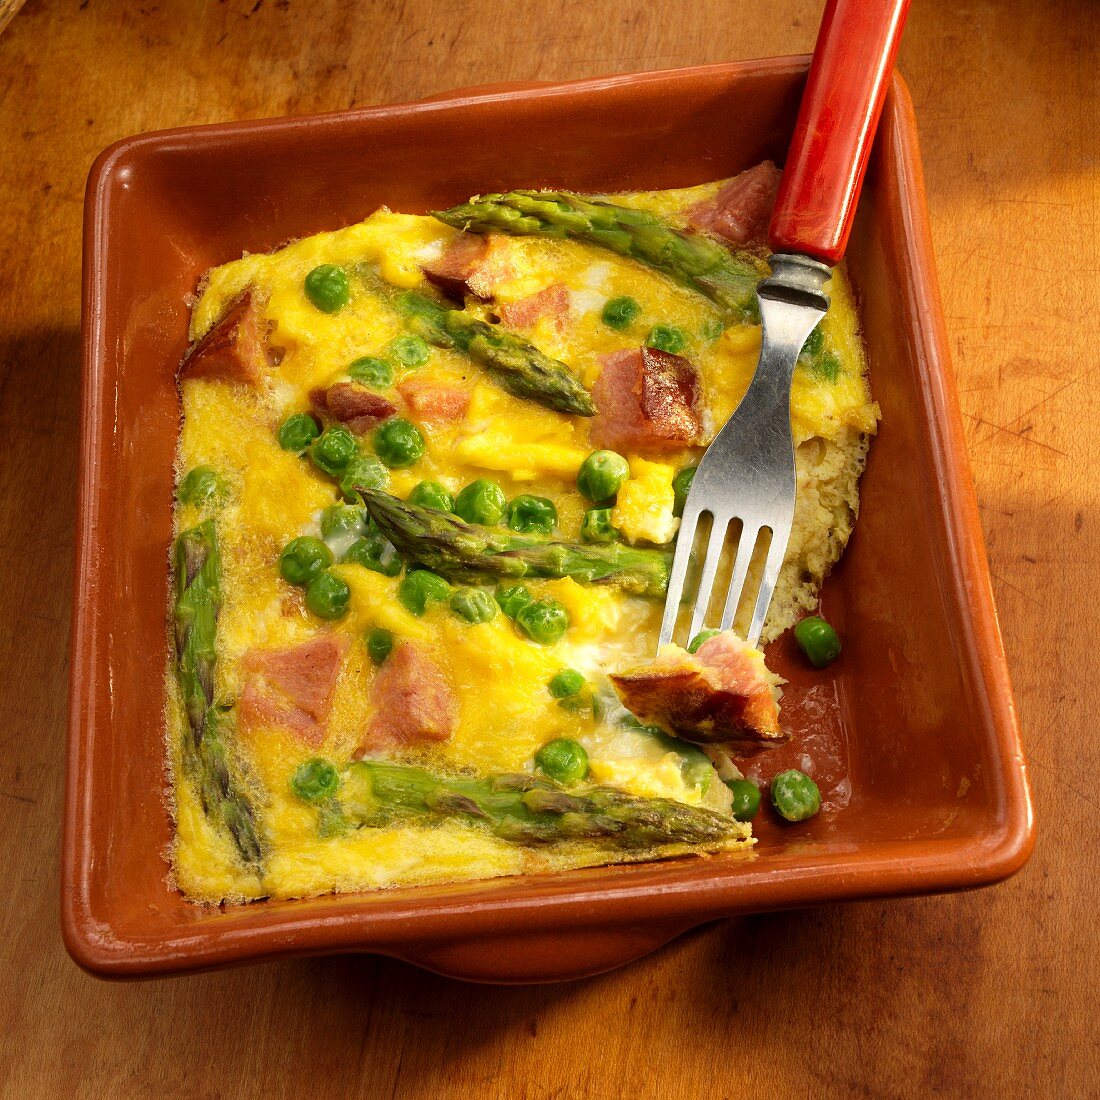 Basque eggs with ham, peas and asparagus with a bite take out